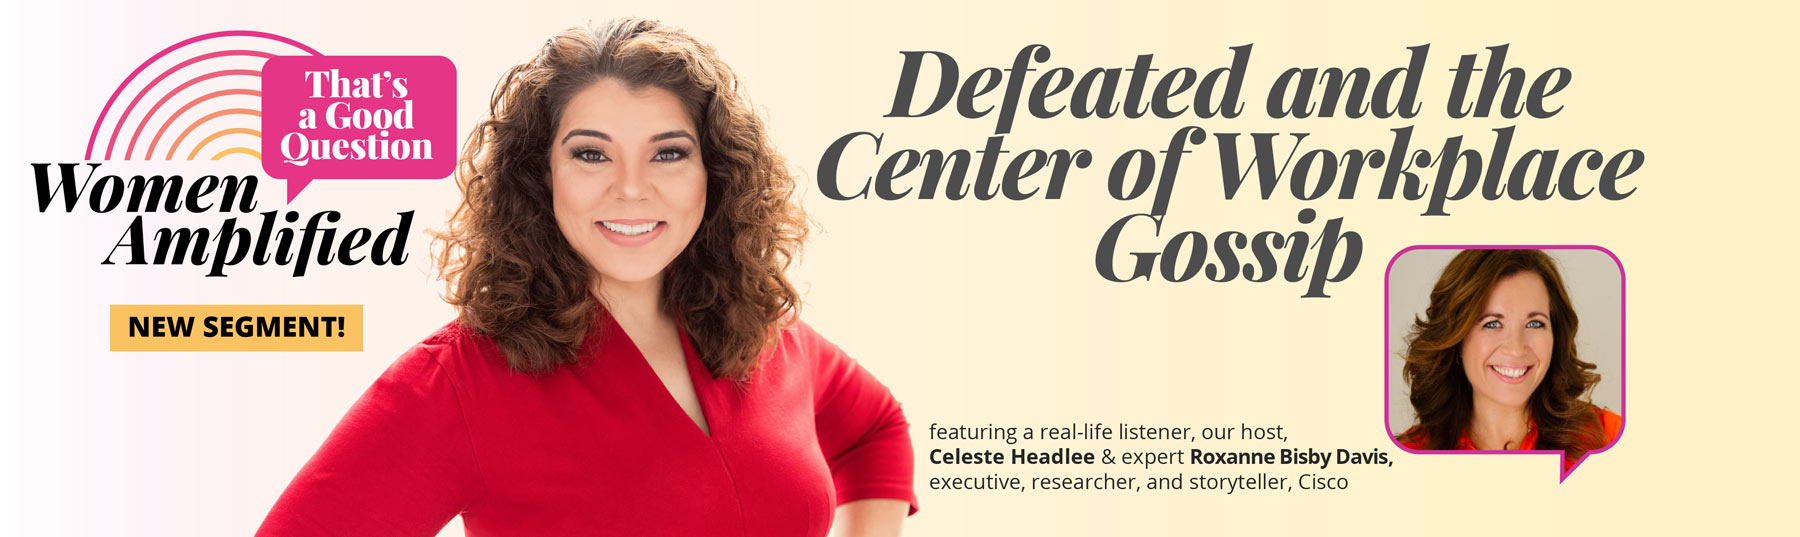 Defeated and the Center of Workplace Gossip | That’s a Good Question